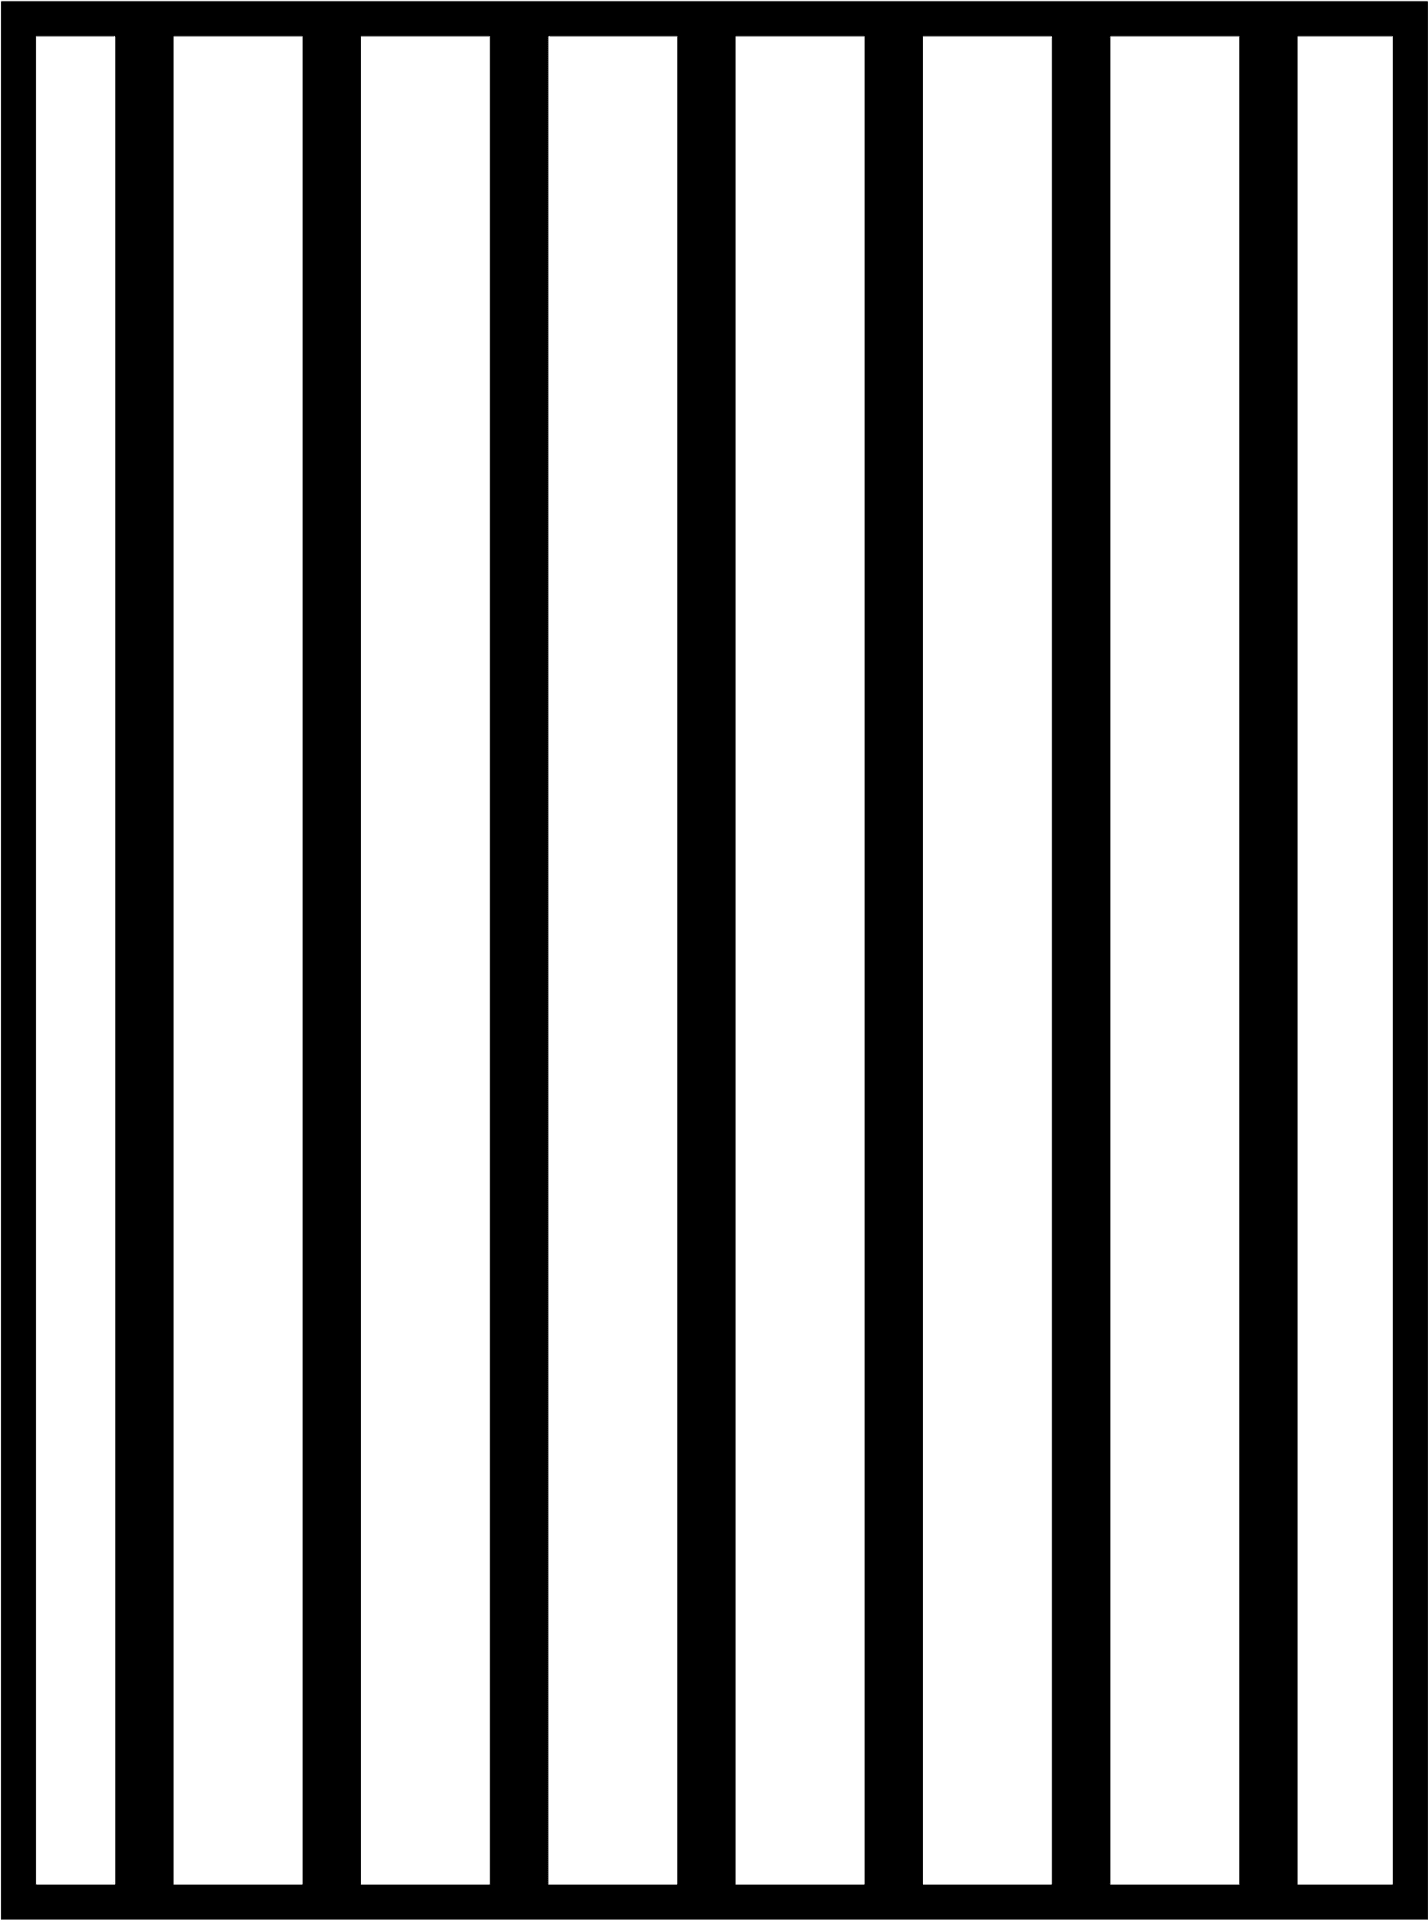 Prison Cell Bars Texture PNG